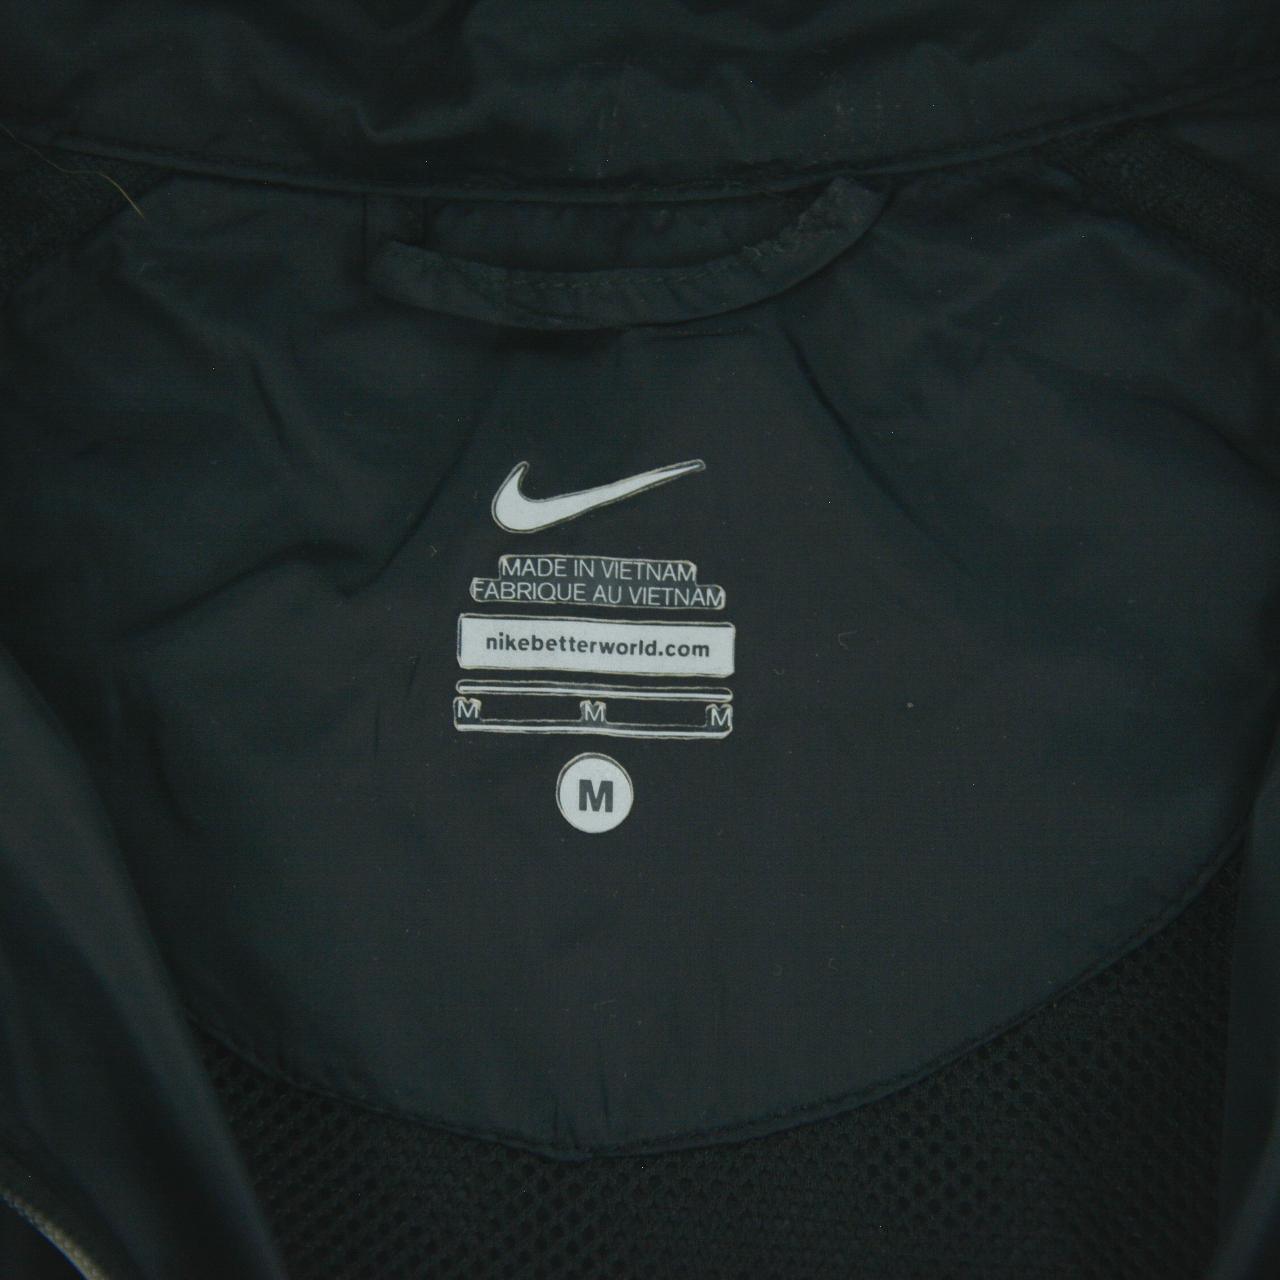 Nike Tracksuit Jacket Woman’s Size M - Known Source